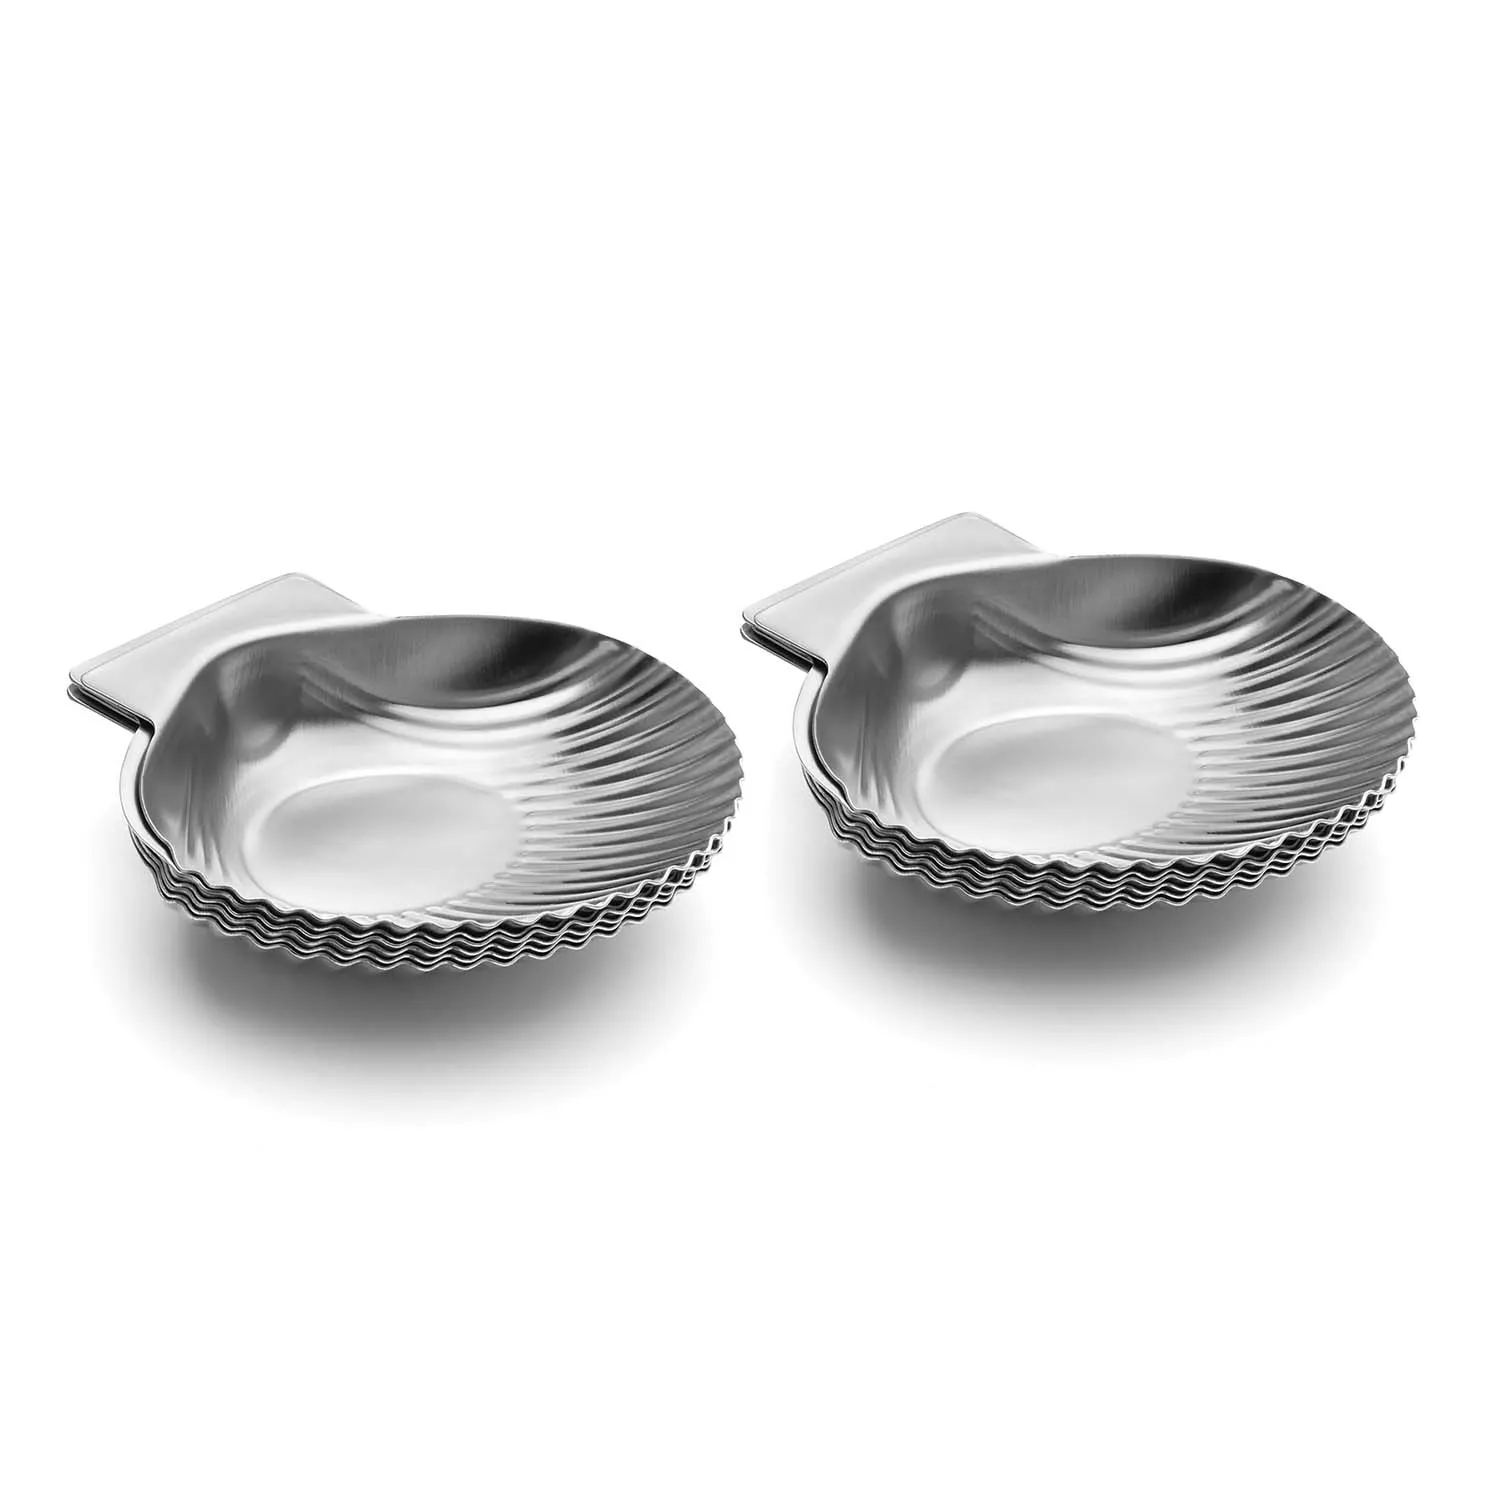 Fox Run 12 Cup Stainless Steel Muffin Pan